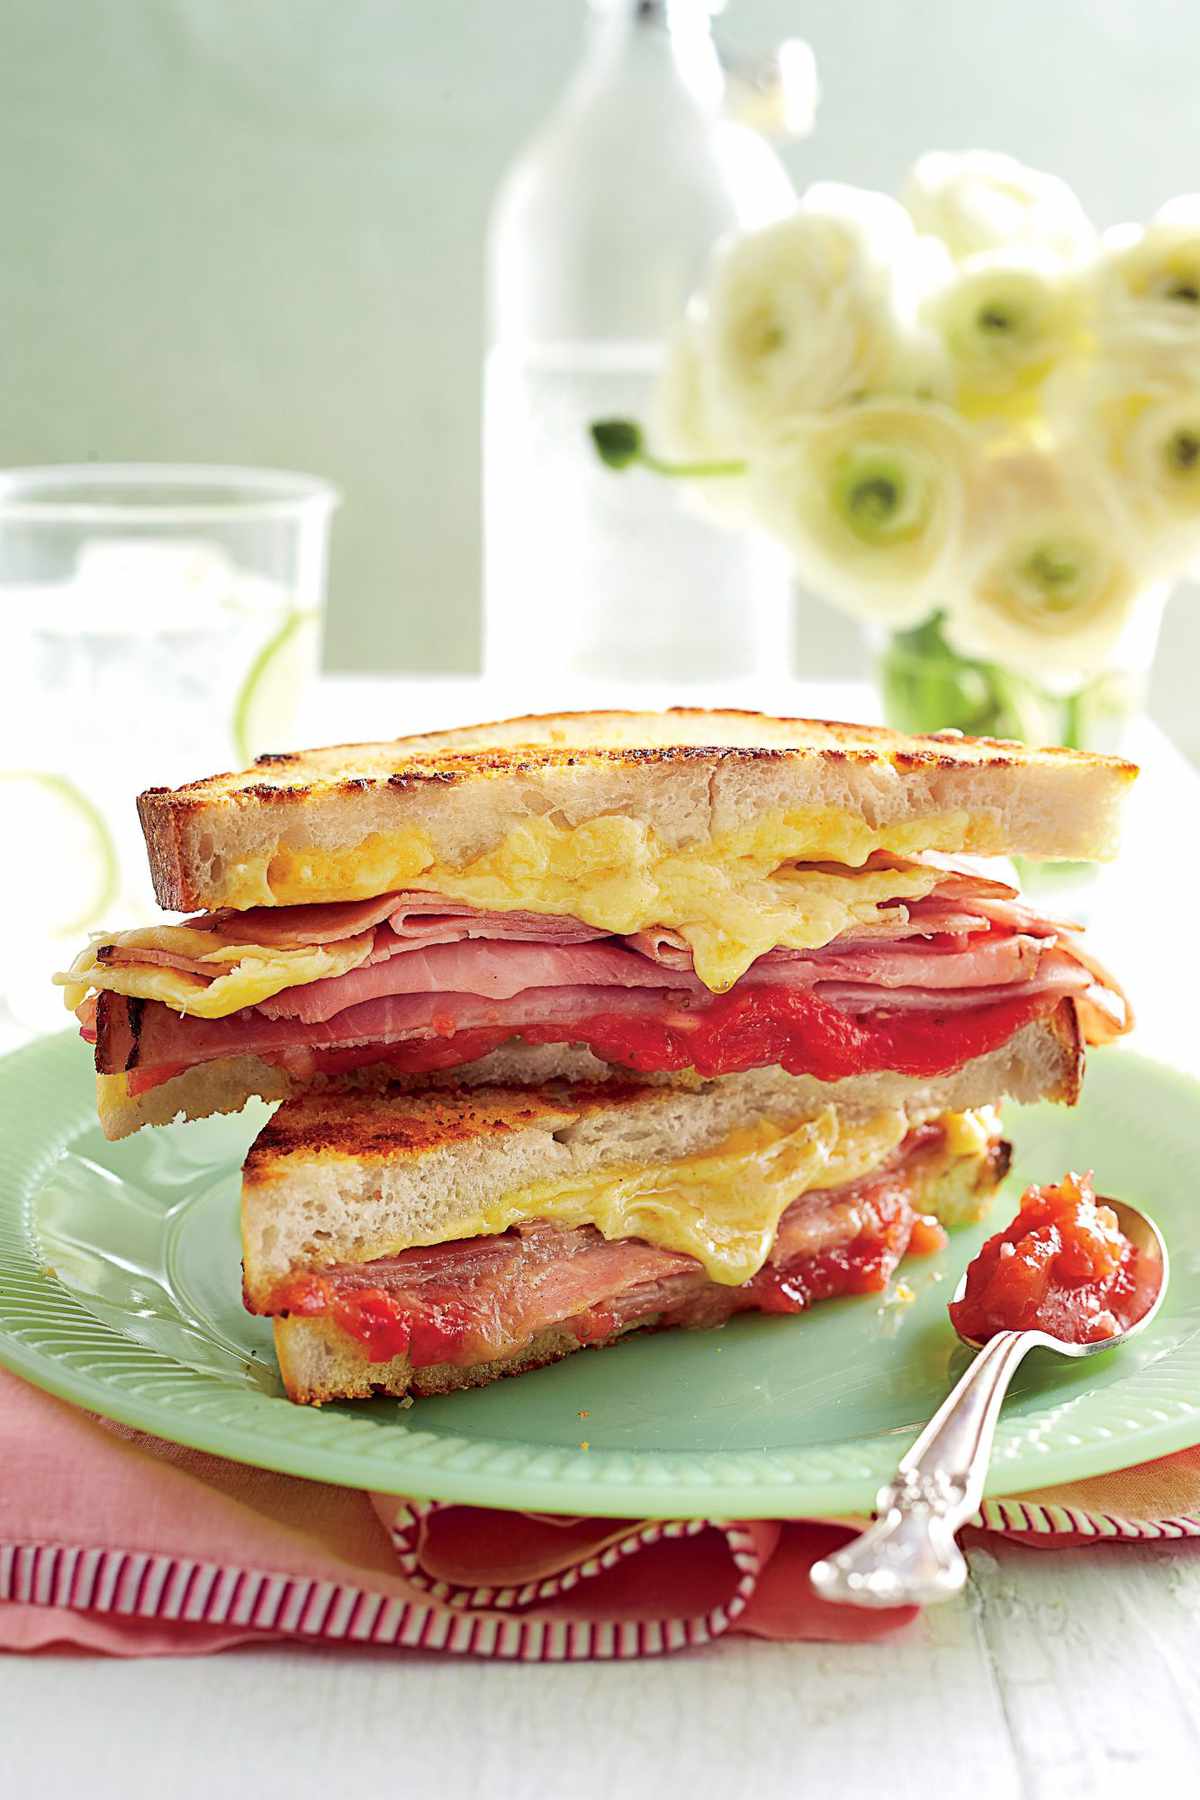 Grilled Ham-and-Cheese Sandwiches with Strawberry-Shallot Jam